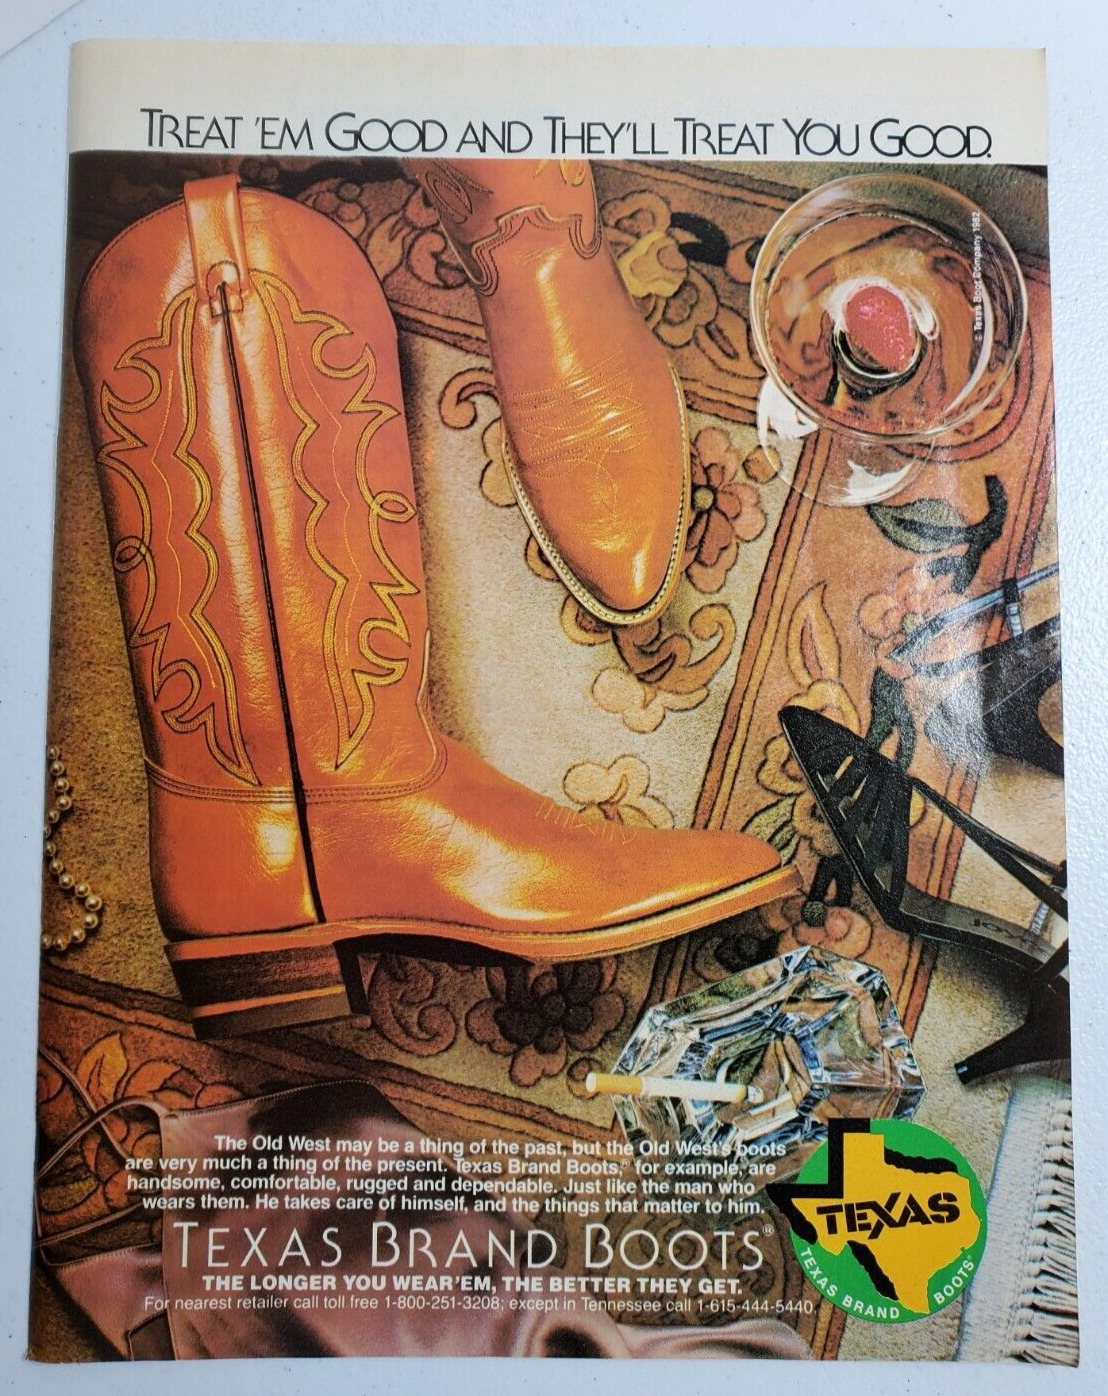 Vintage Texas Brand Boots Ad